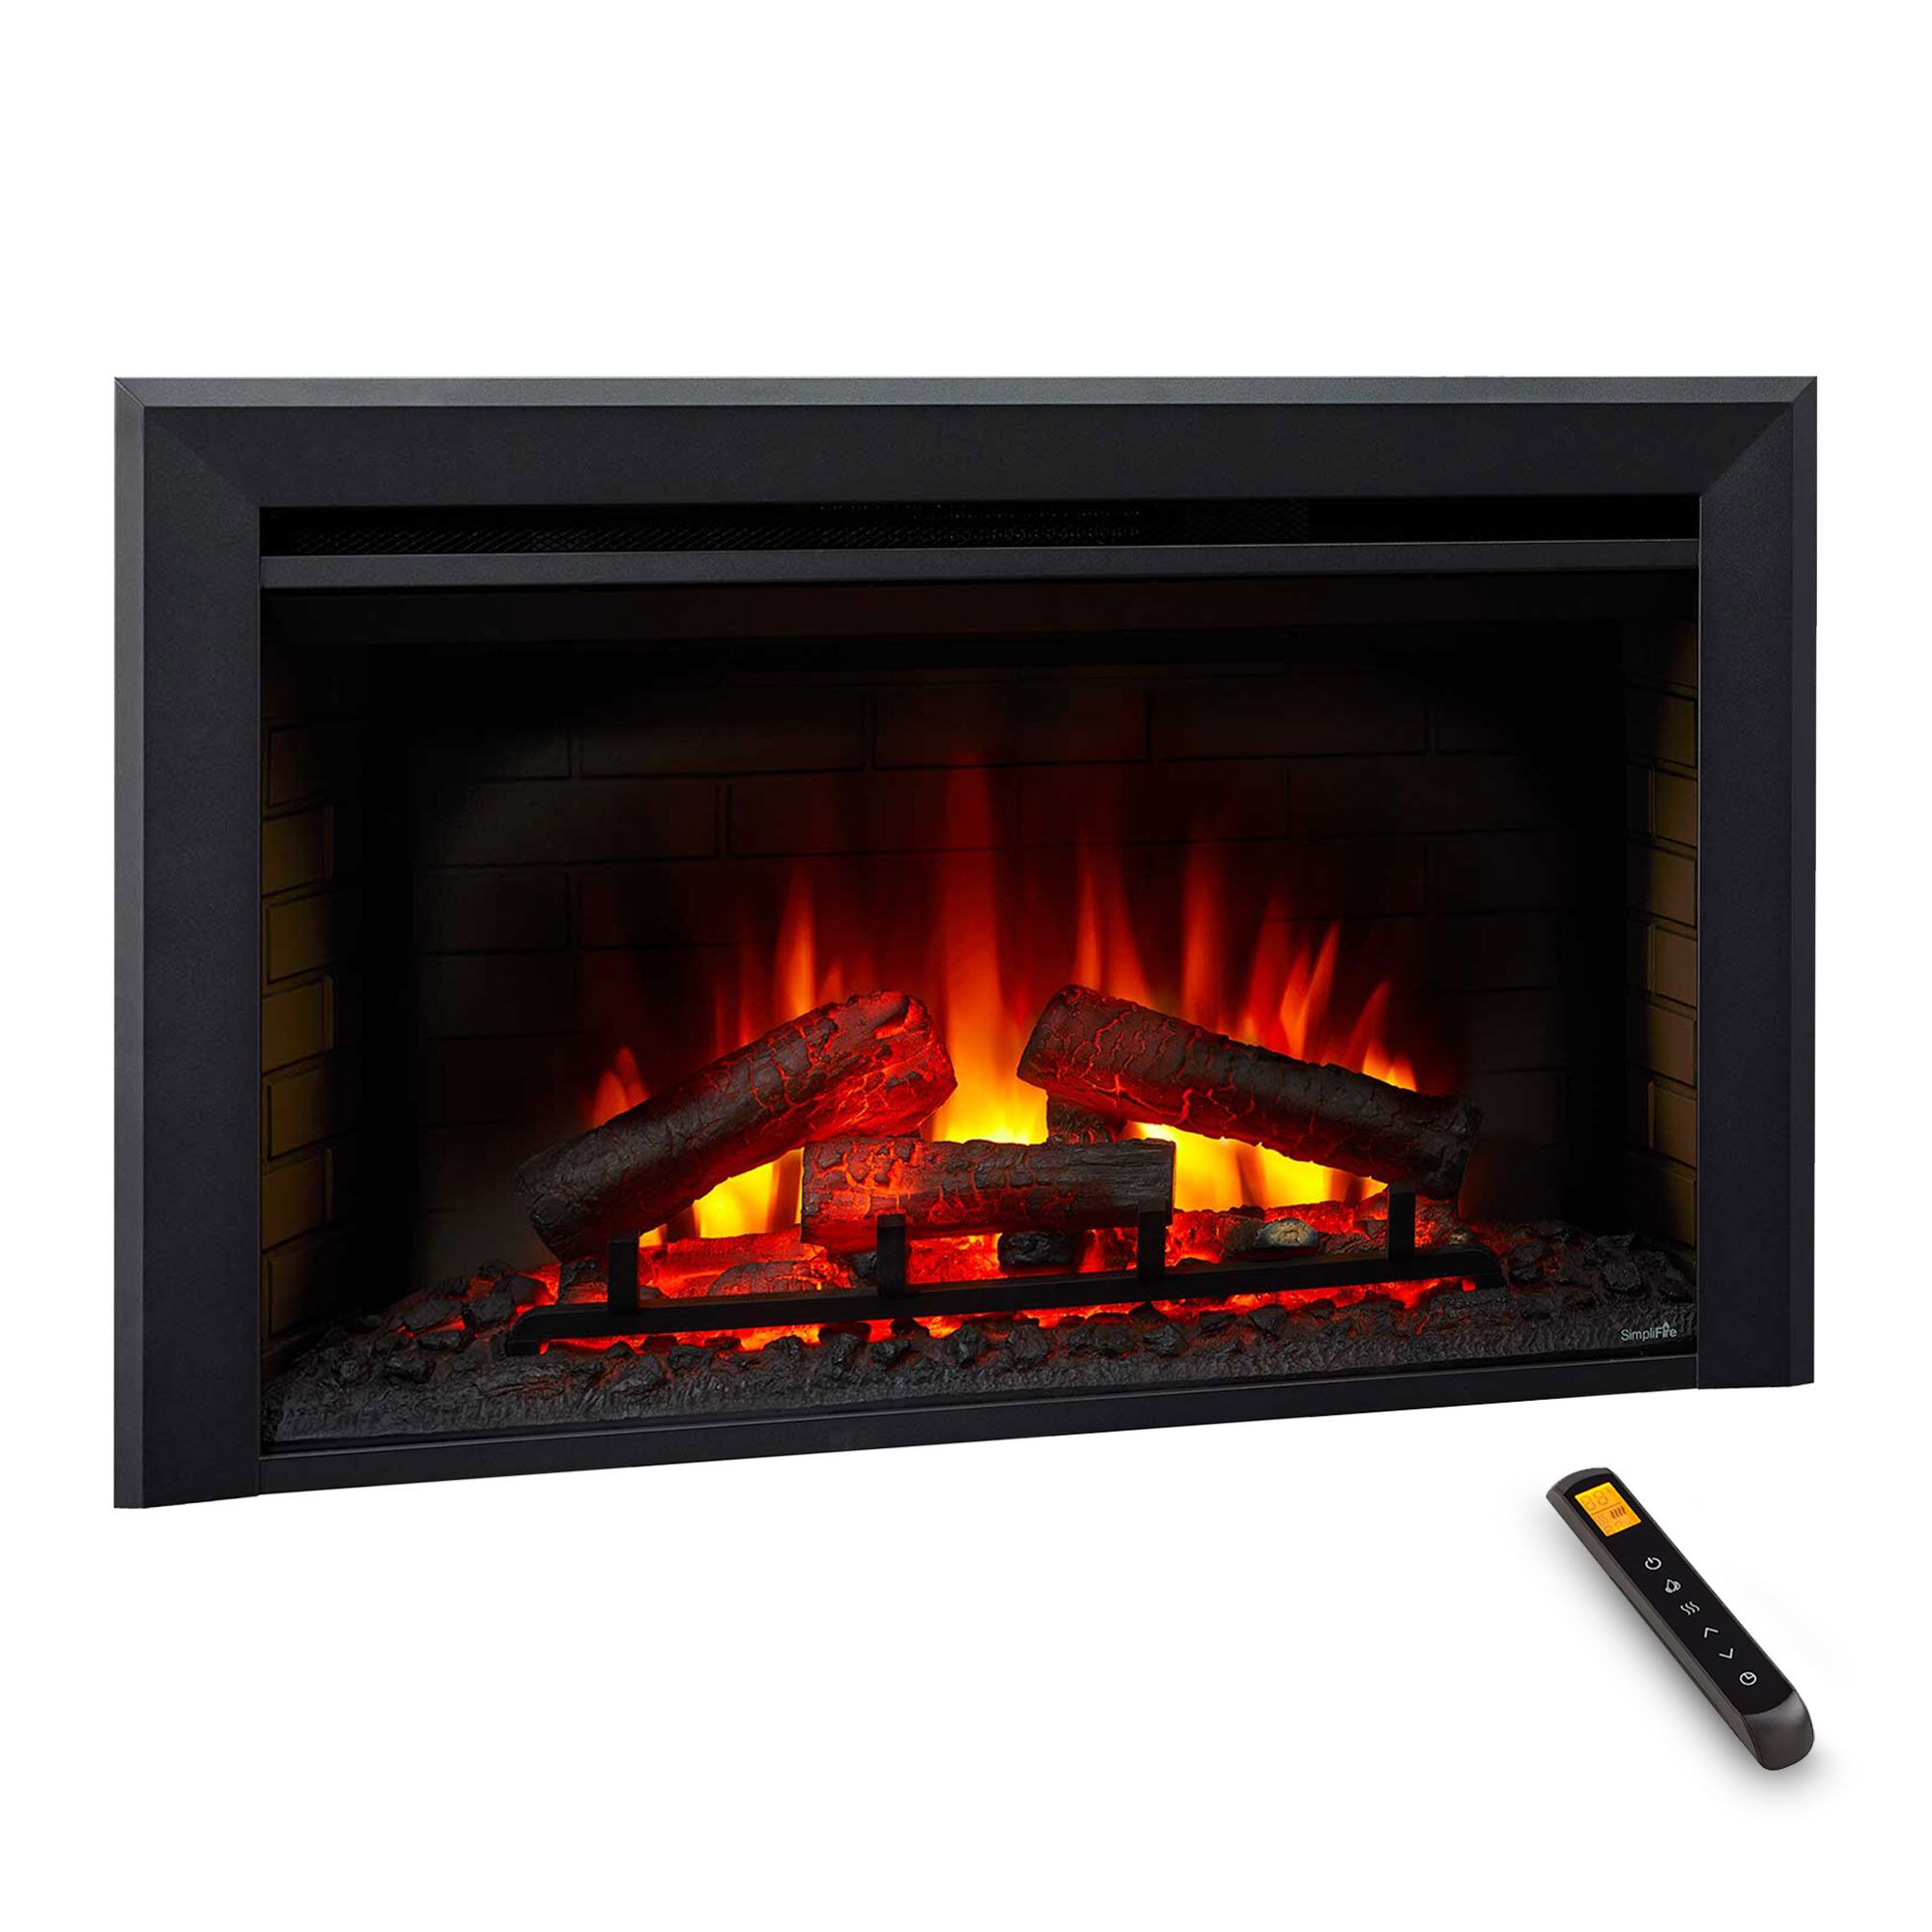 35 inch electric fireplace insert product image